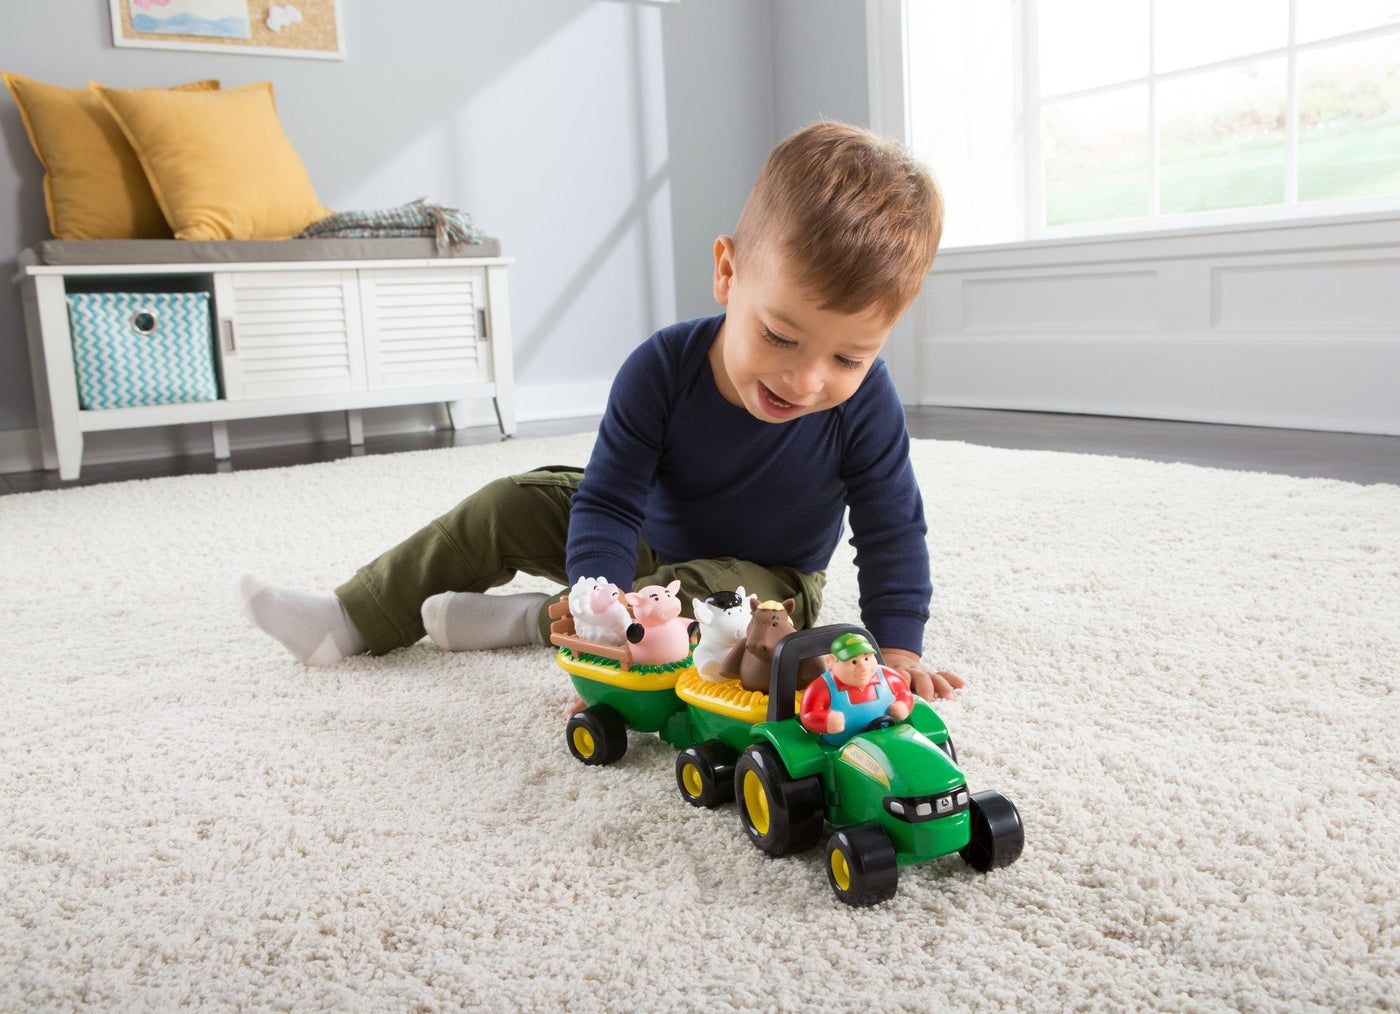 Boy playing with John Deere toy on carpet floor